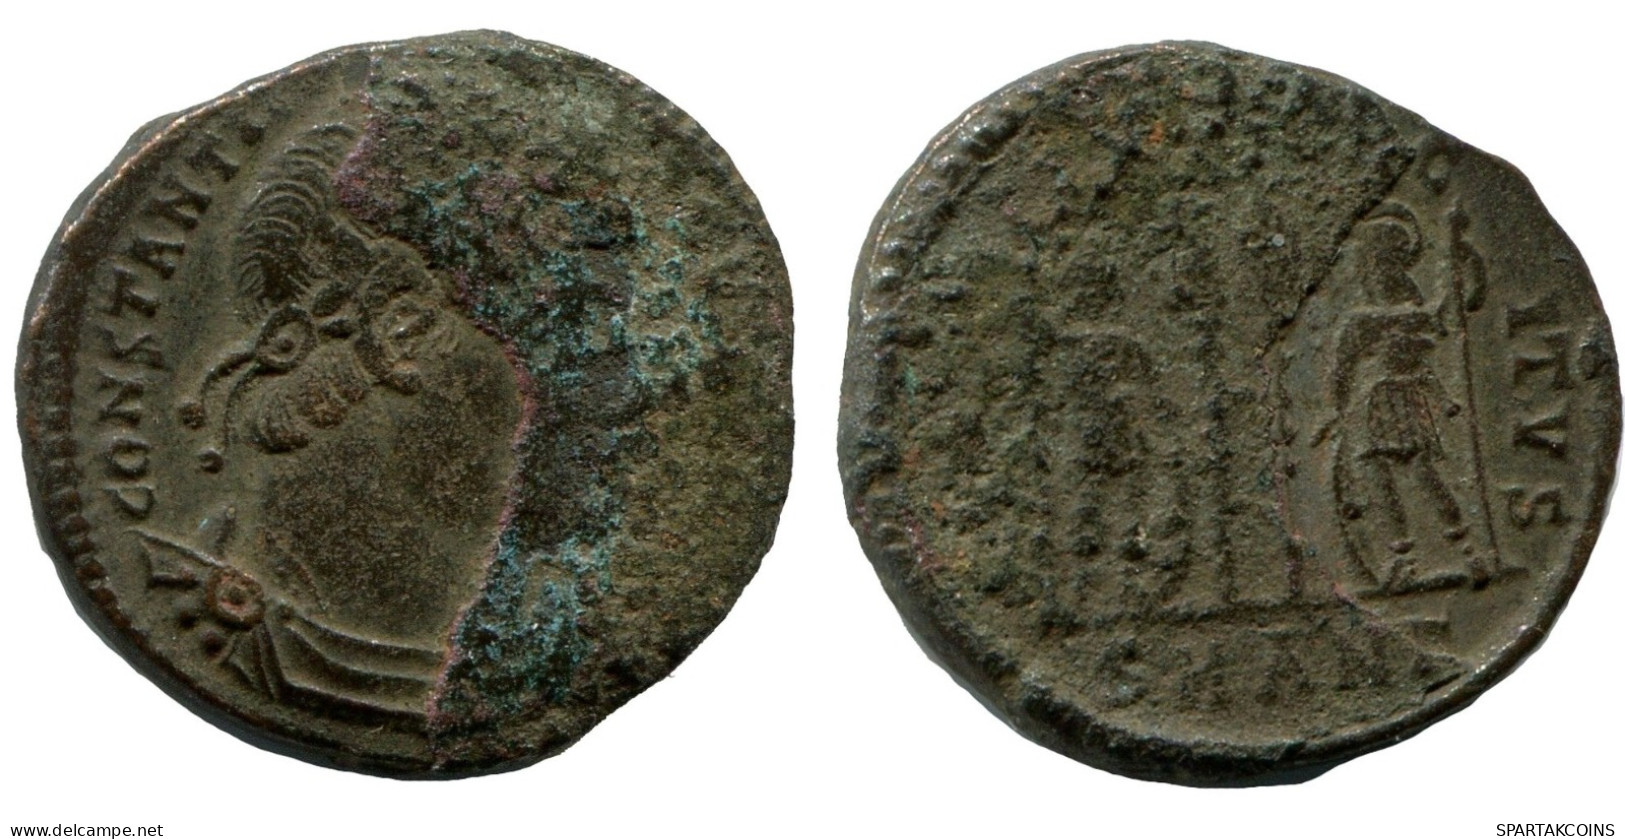 CONSTANTINE I MINTED IN ANTIOCH FOUND IN IHNASYAH HOARD EGYPT #ANC10695.14.E.A - El Imperio Christiano (307 / 363)